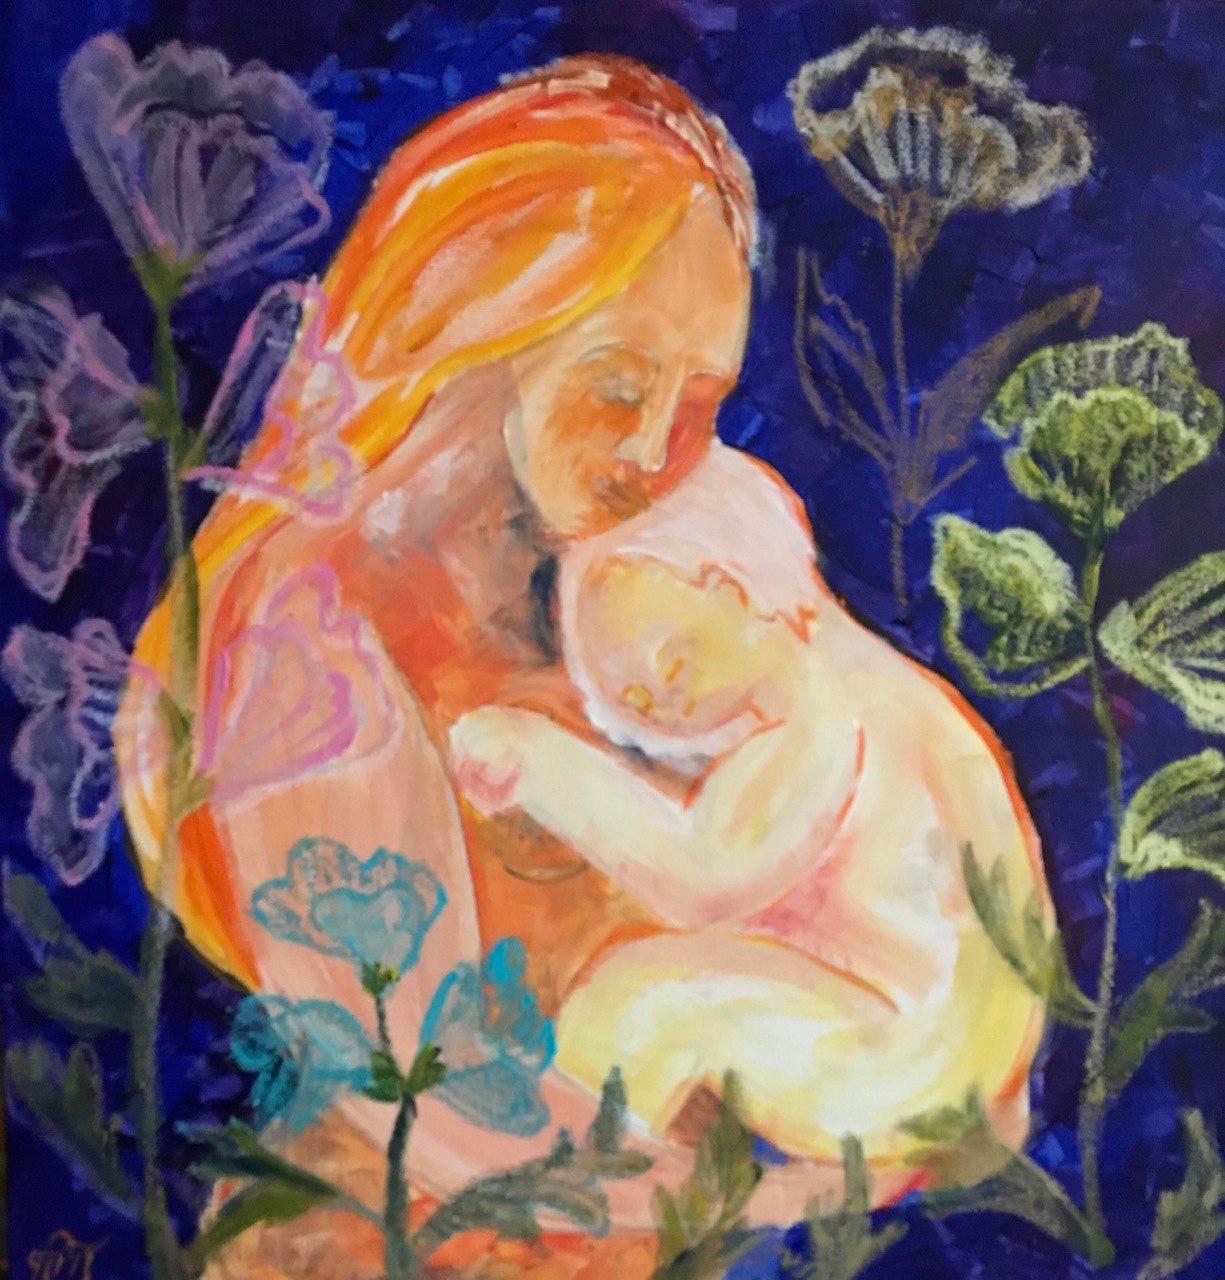 Tetiana Pchelnykova Figurative Painting - Mother's Embrace, "Gardens of Resilience" series, original painting 